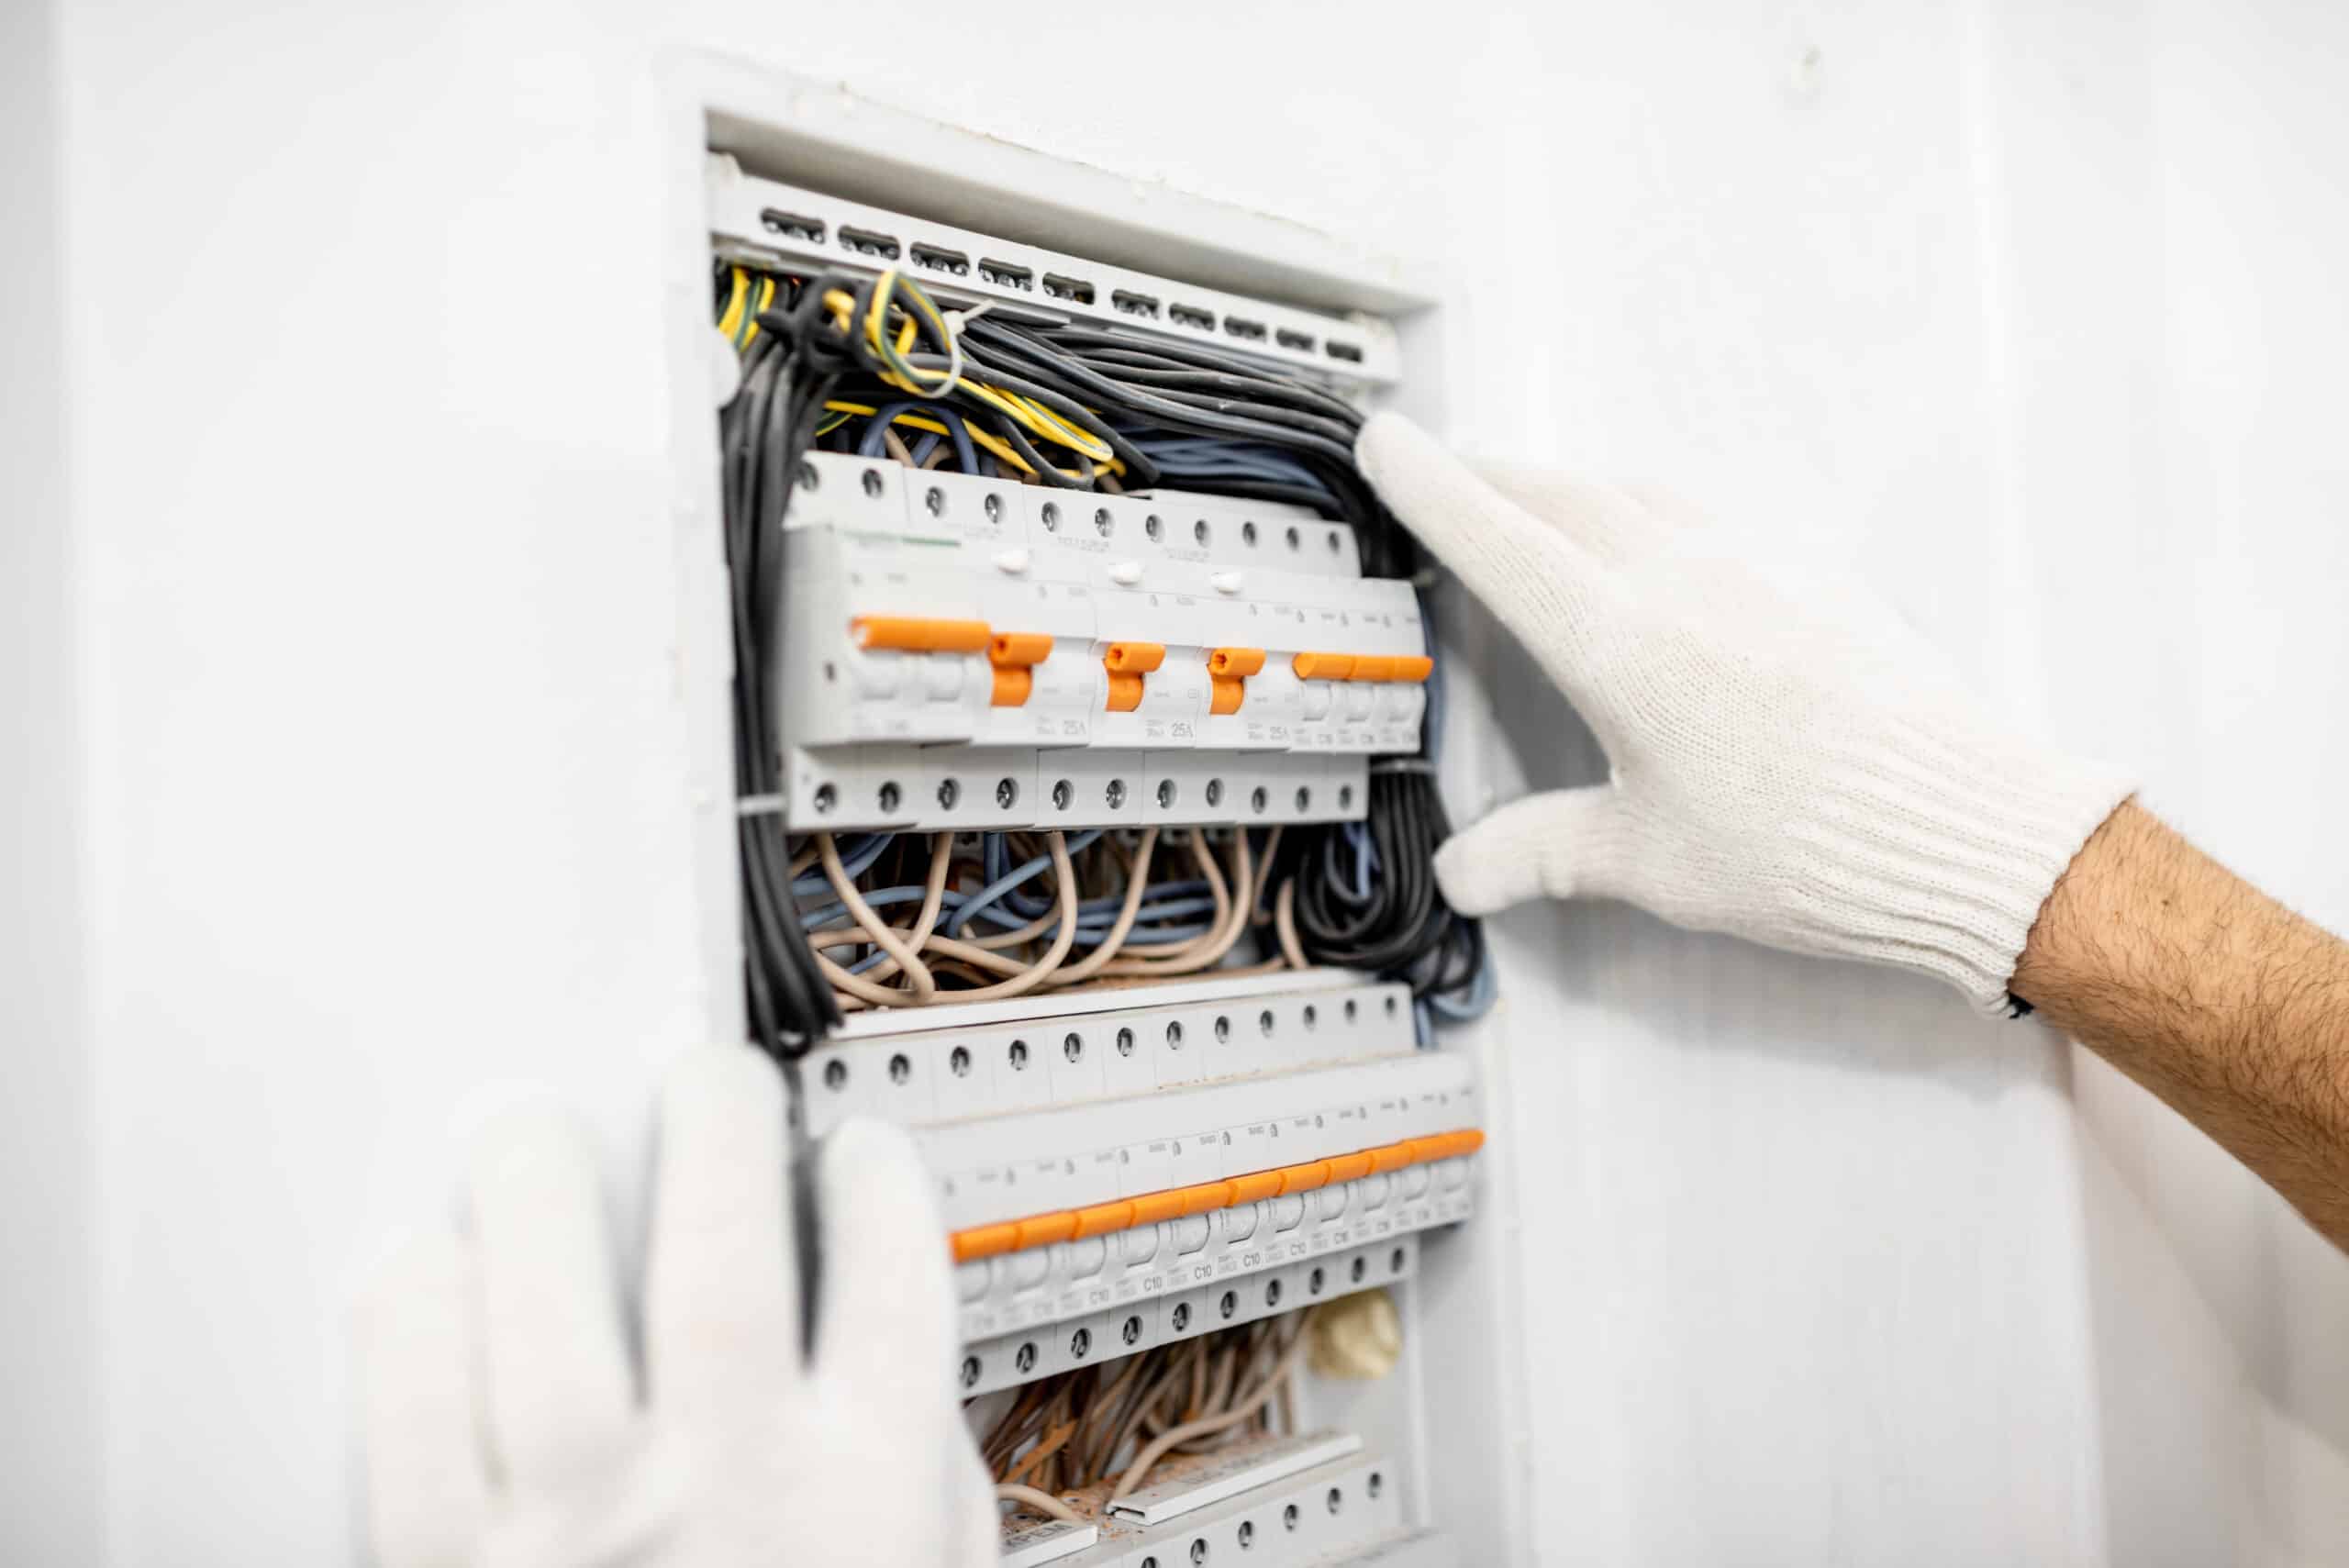 Following an electrical system design, a man is putting wires into an electrical panel.